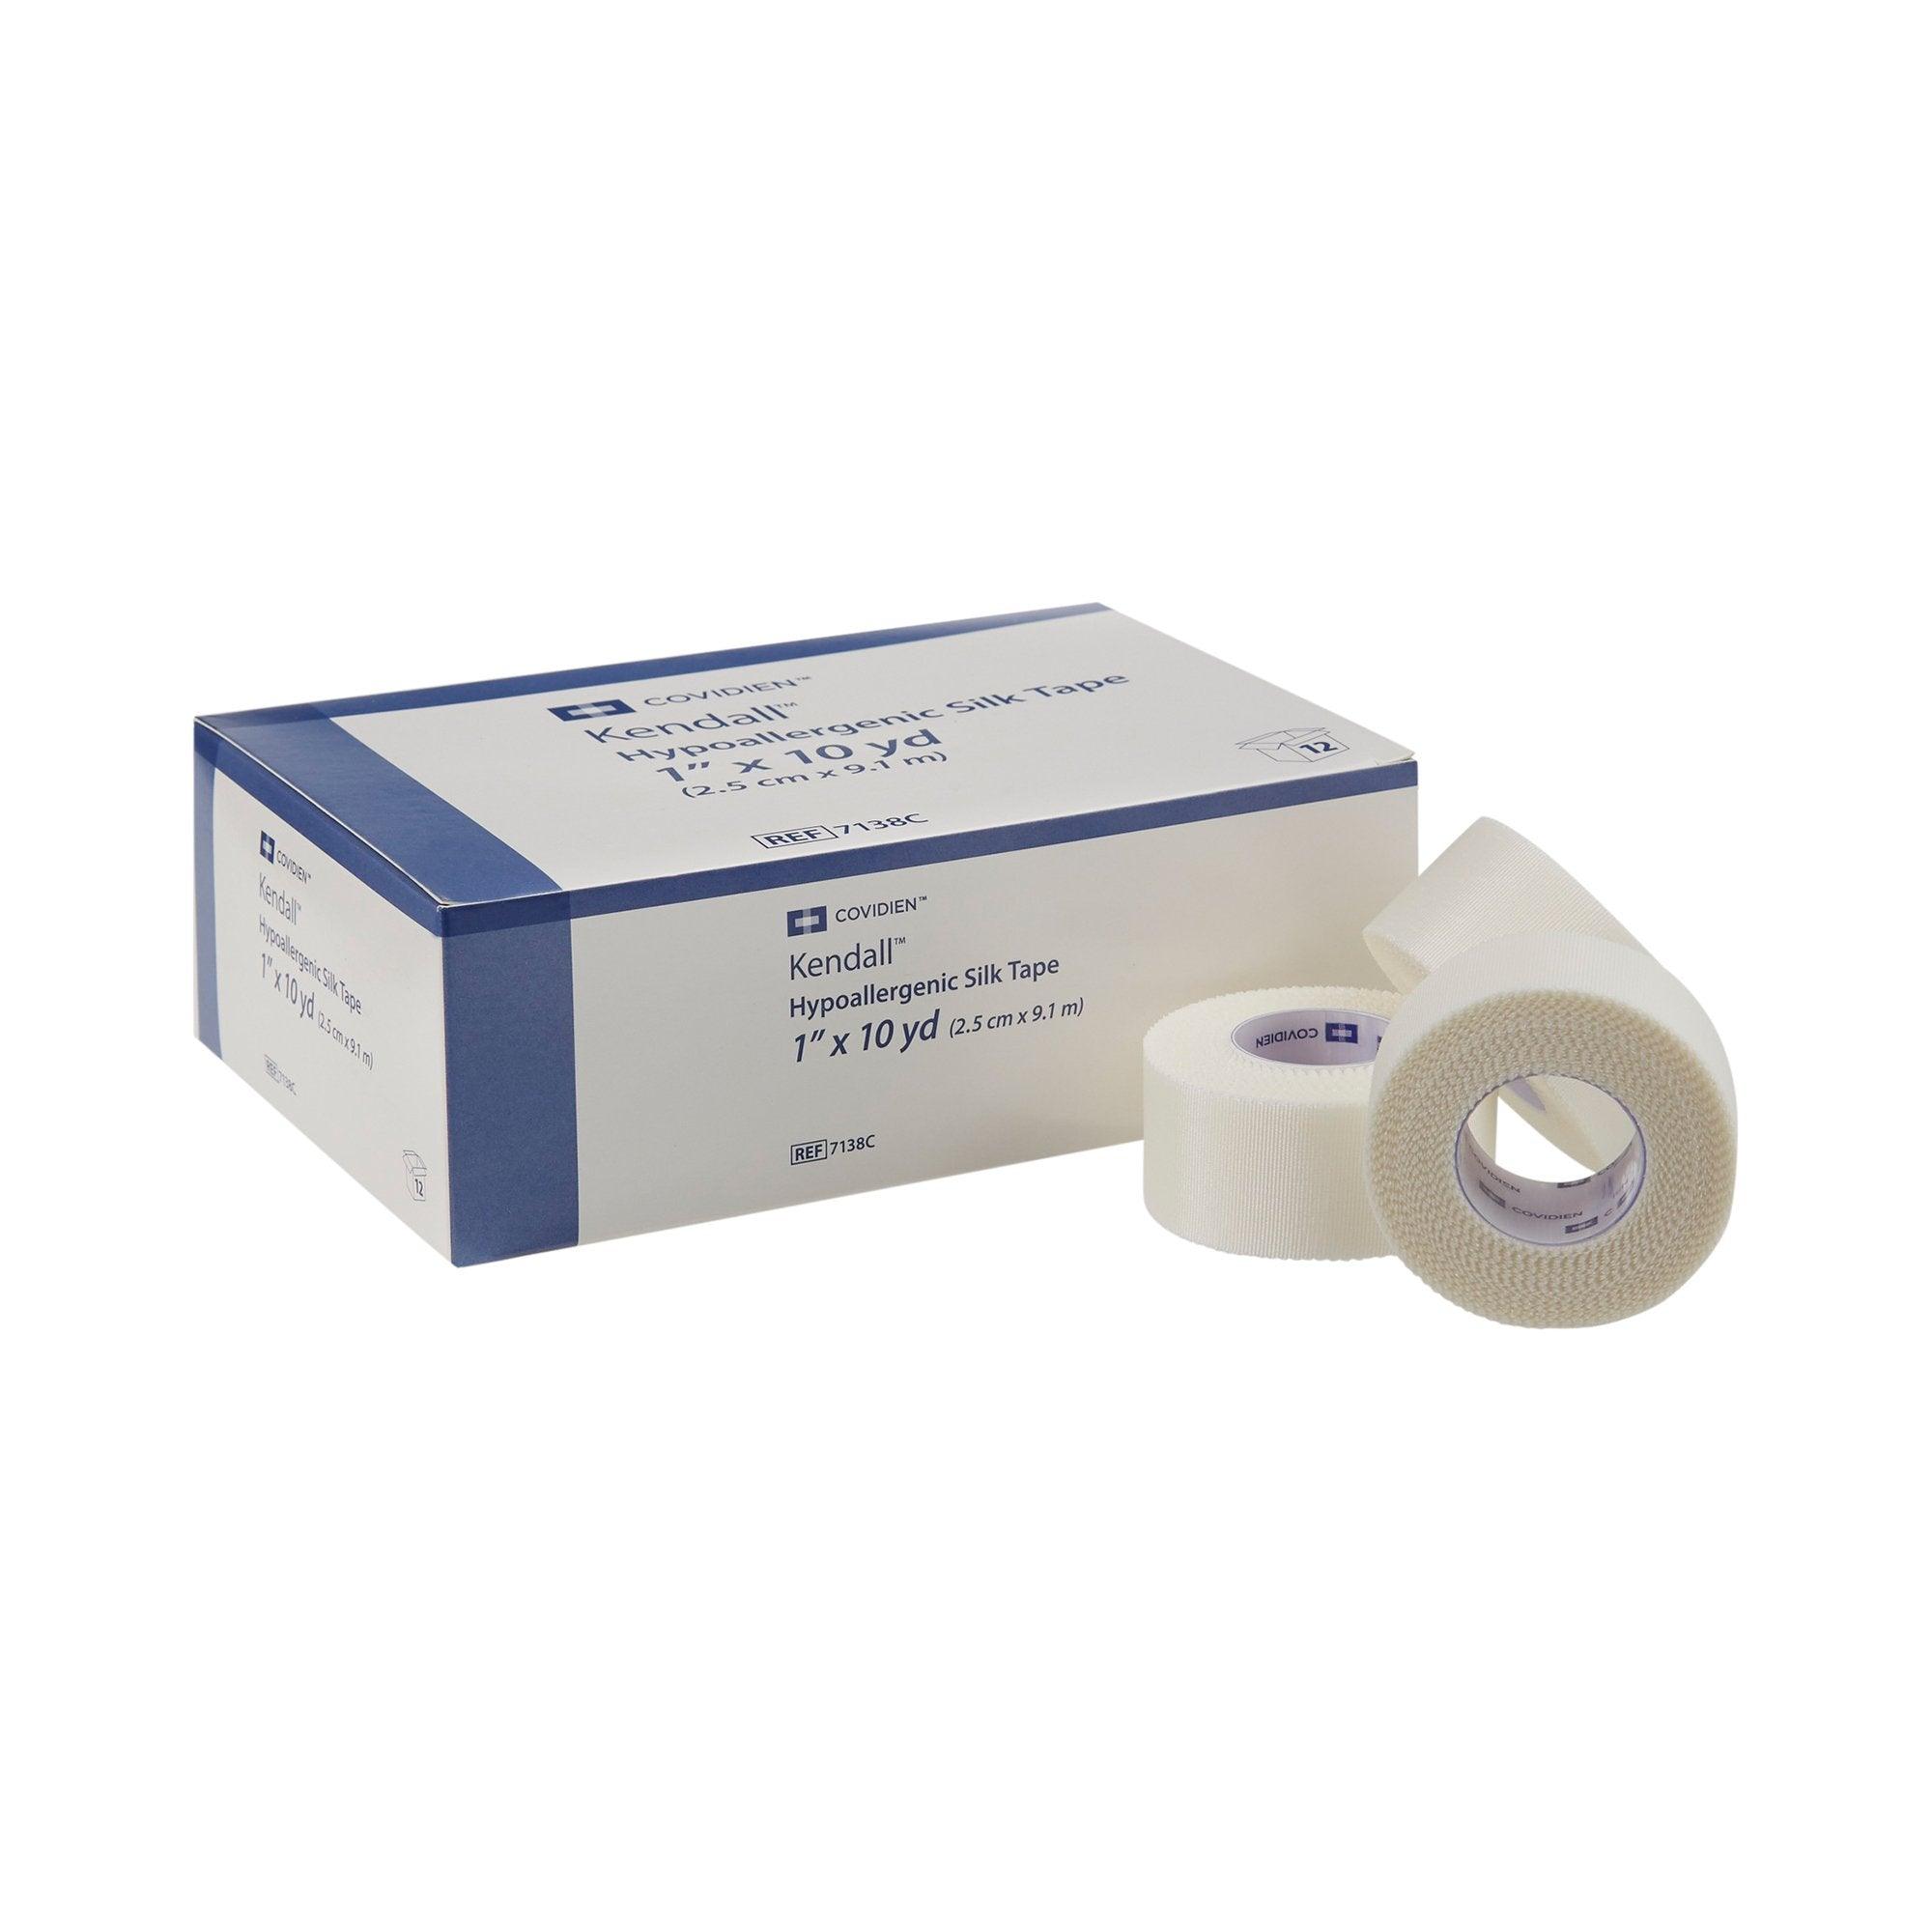 Kendall Hypoallergenic Paper Tape 1" x 10 yd